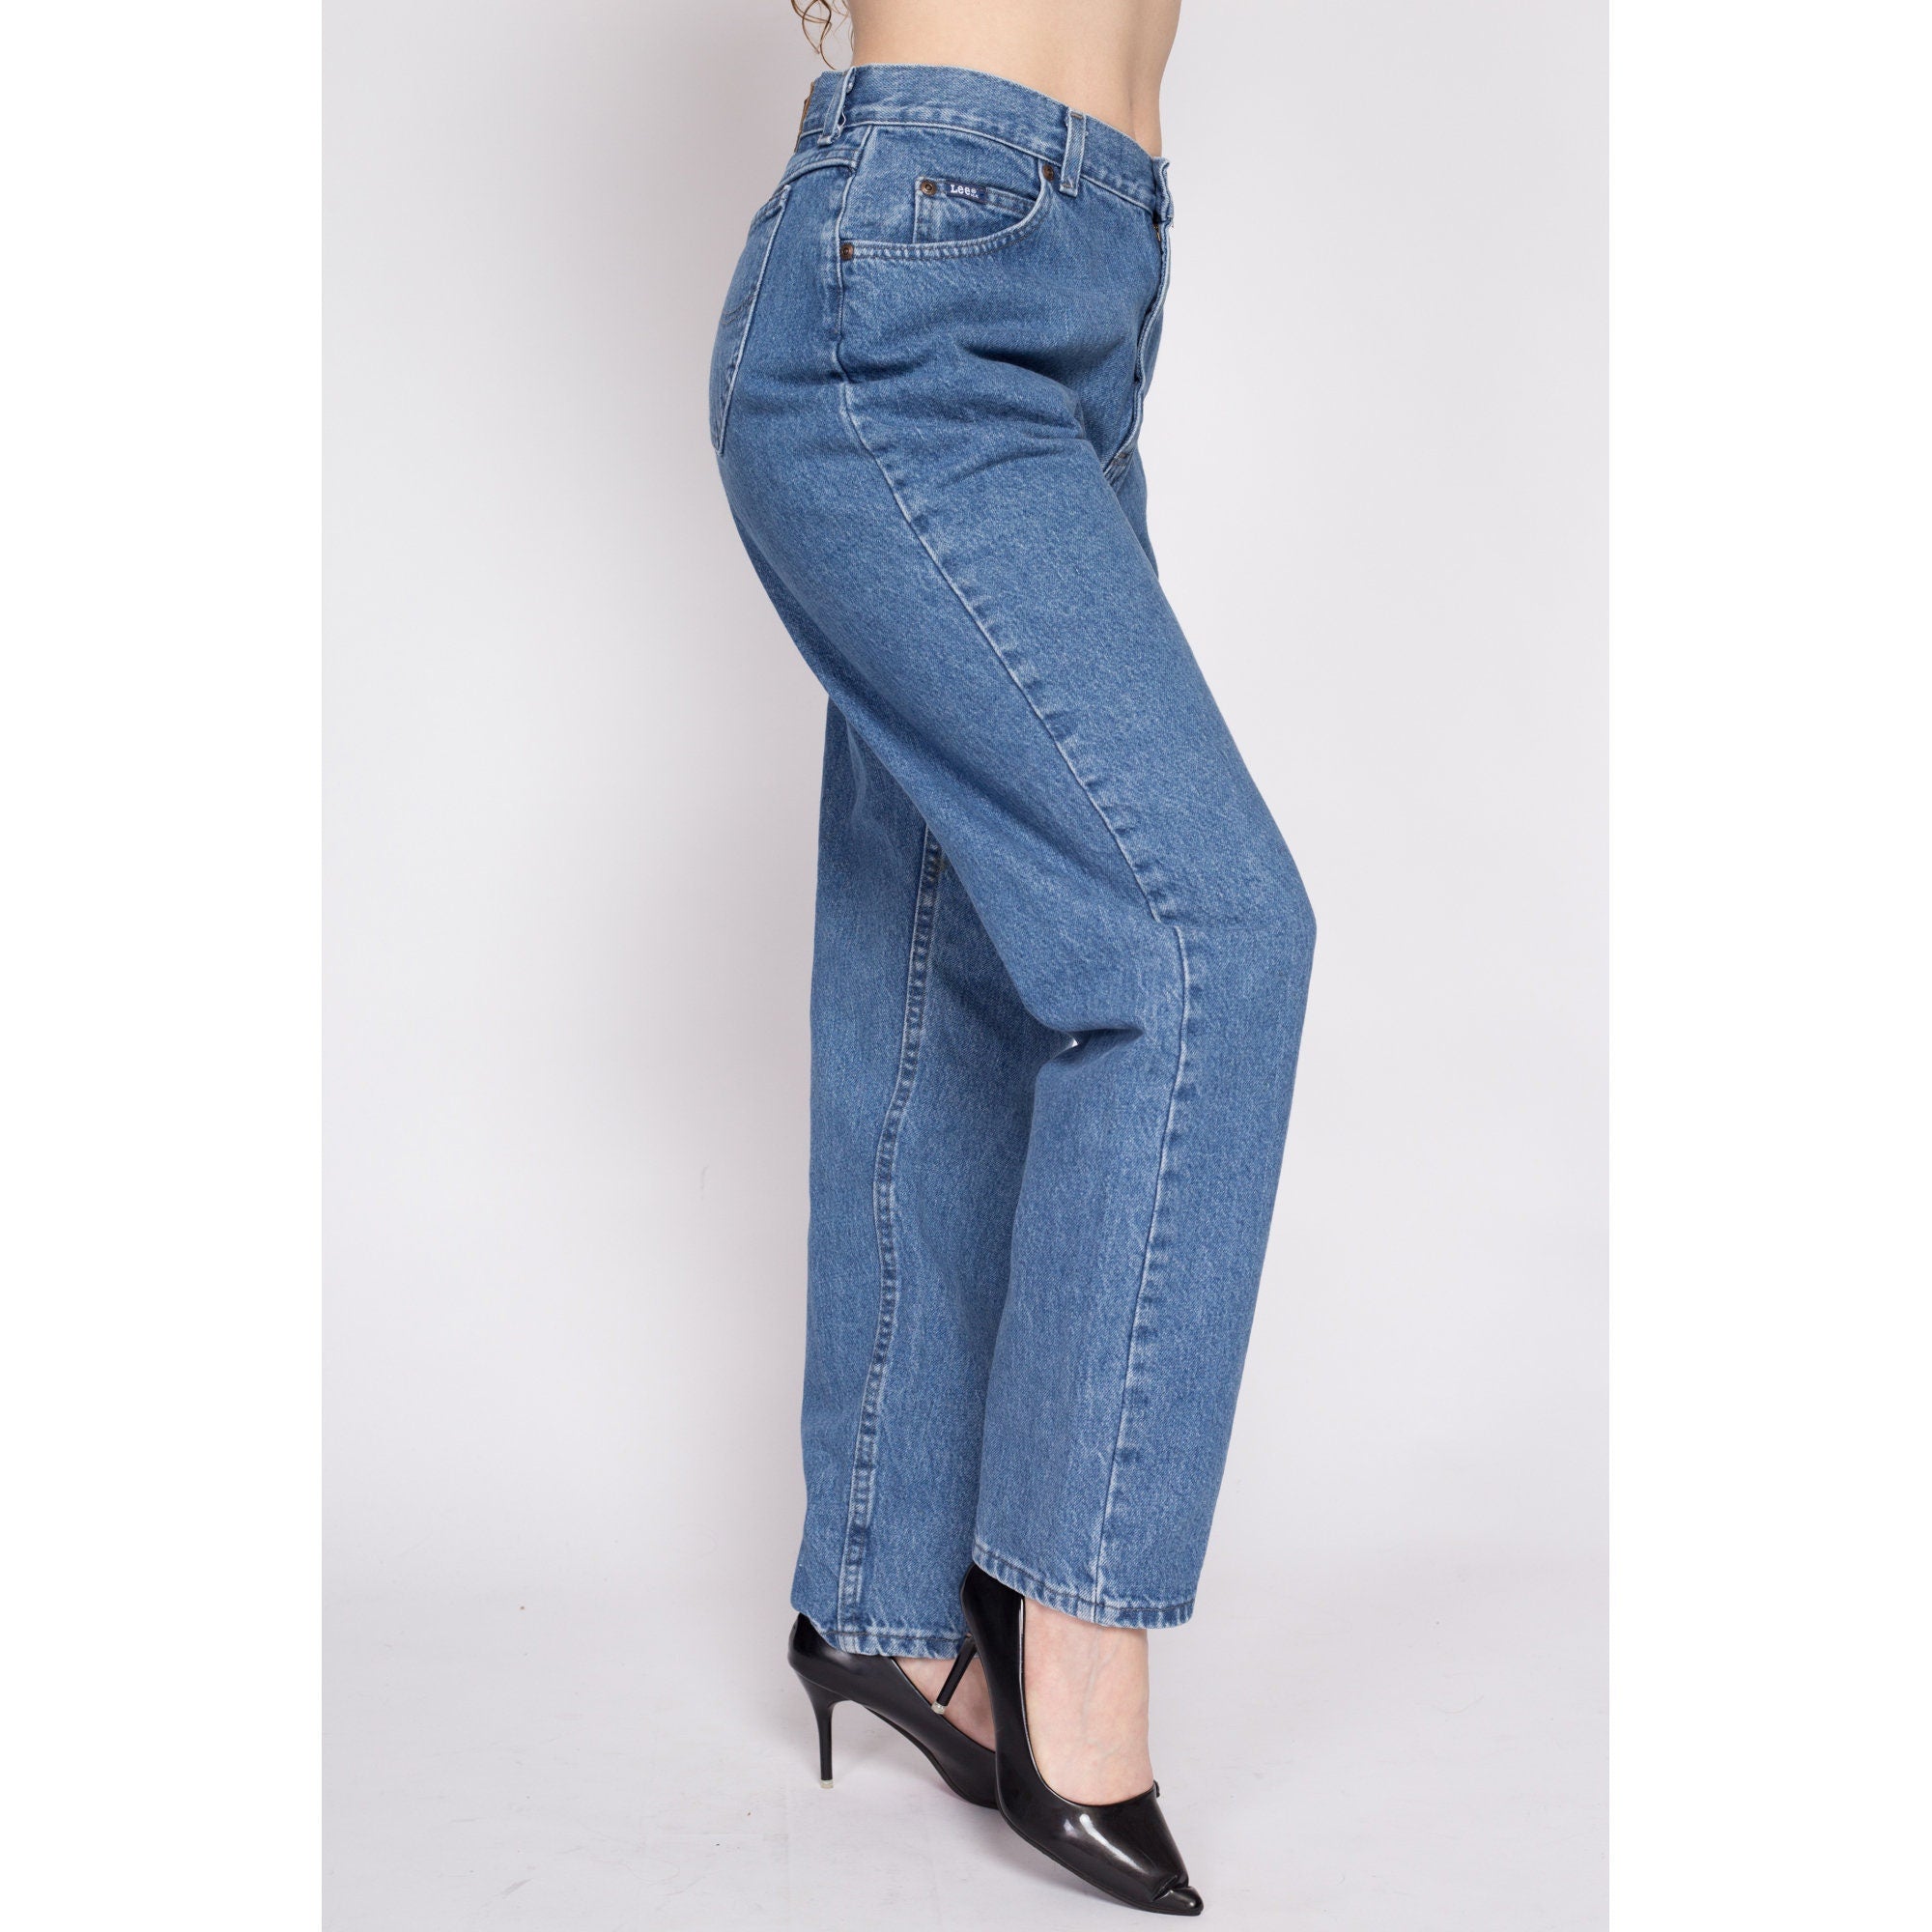 90s Lee High Waisted Mom Jeans - Medium to Large, 30.5